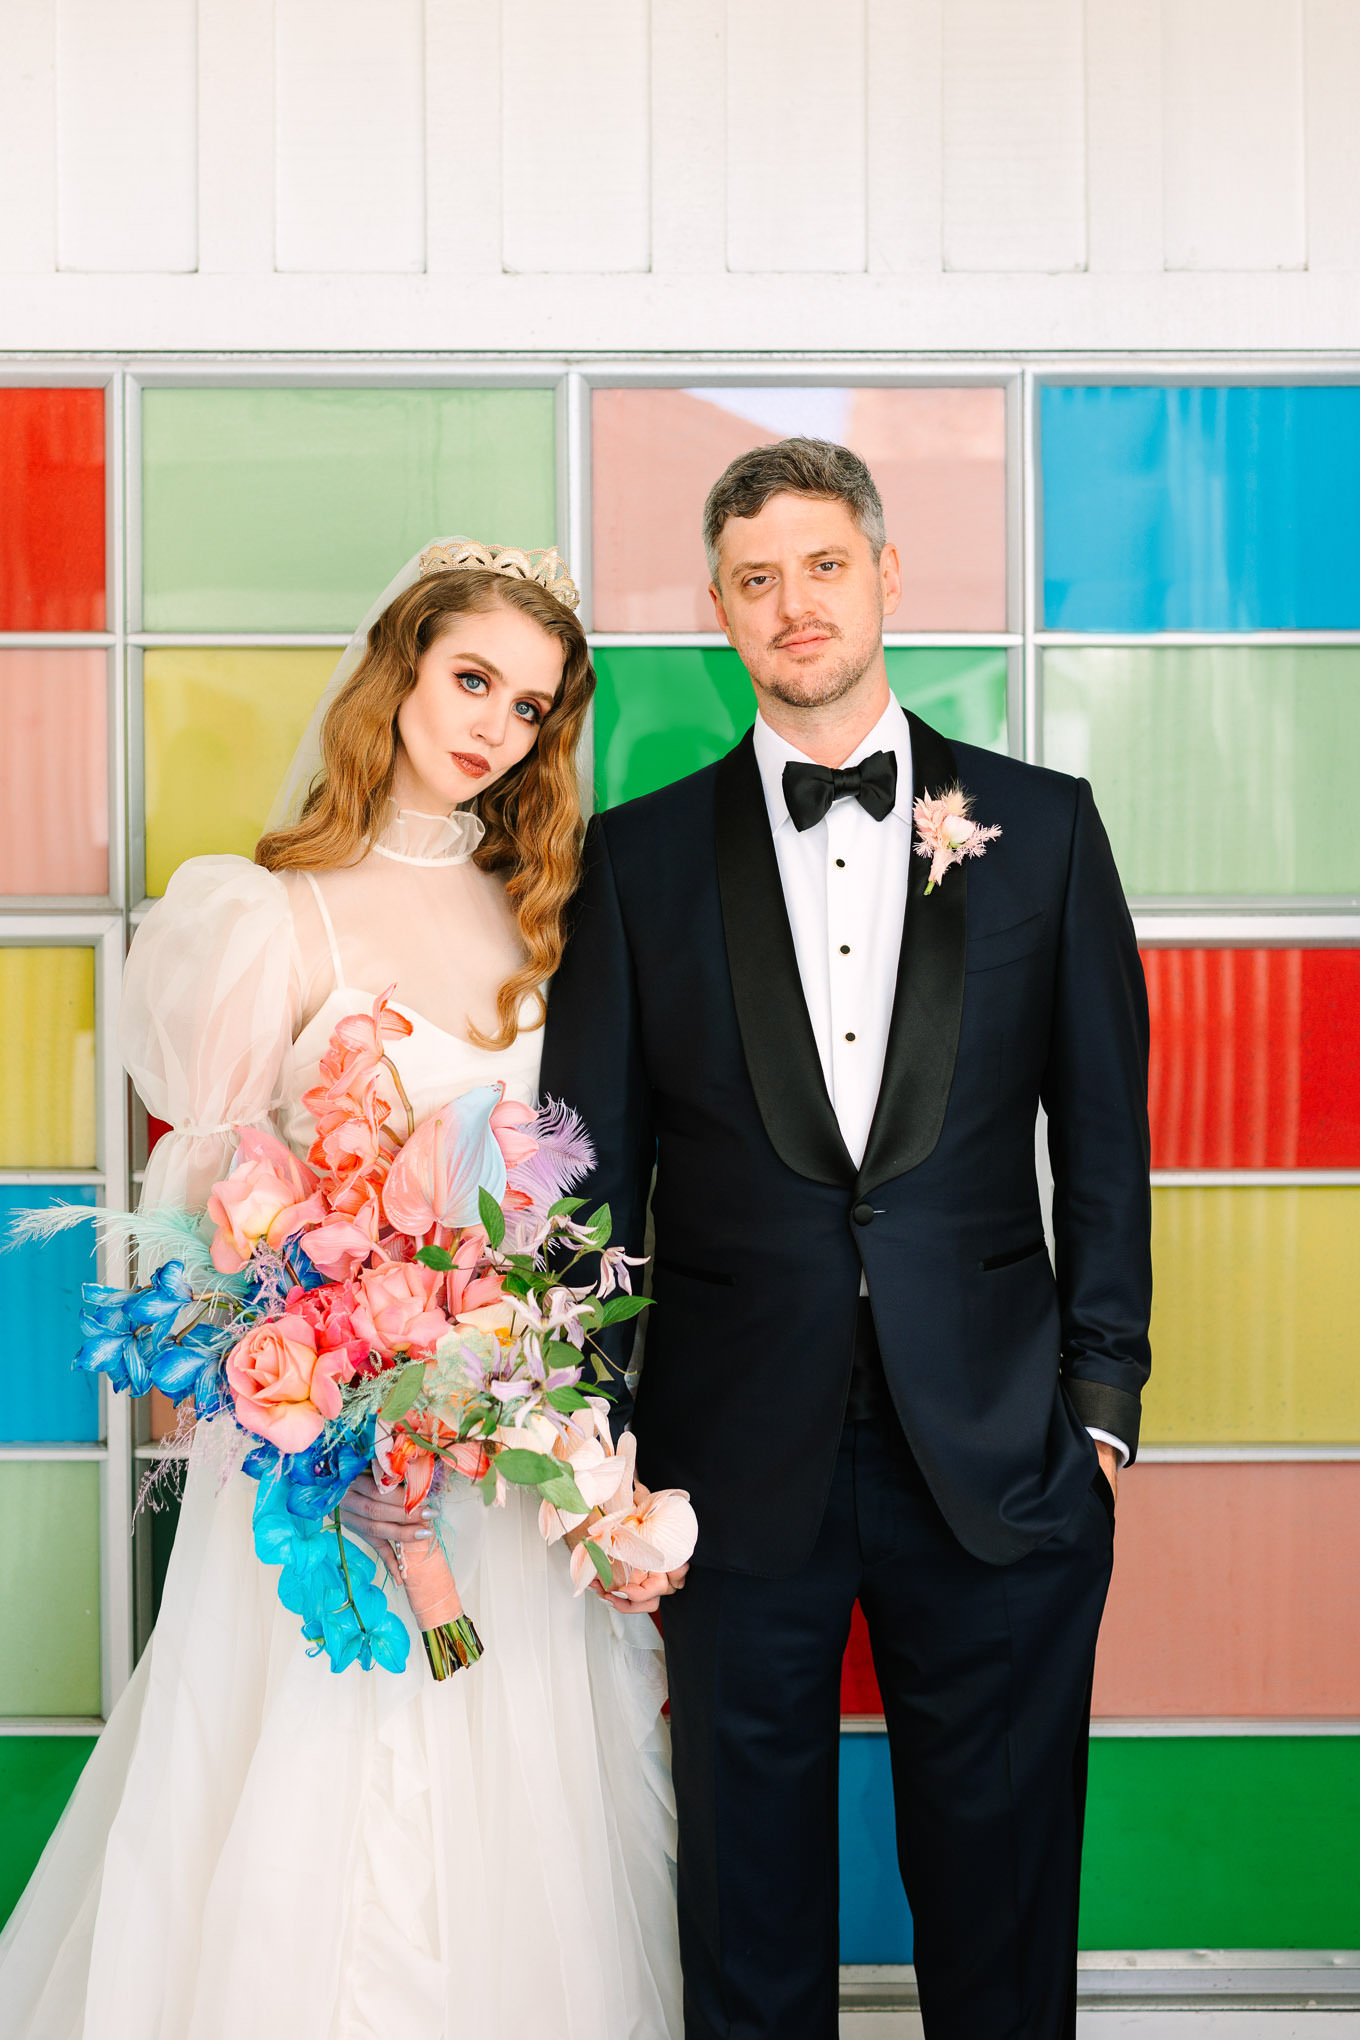 Allison Harvard & Jeremy Burke wedding portraits at the Madonna Inn | Colorful and quirky wedding at Higuera Ranch in San Luis Obispo | #sanluisobispowedding #californiawedding #higueraranch #madonnainn   
Source: Mary Costa Photography | Los Angeles